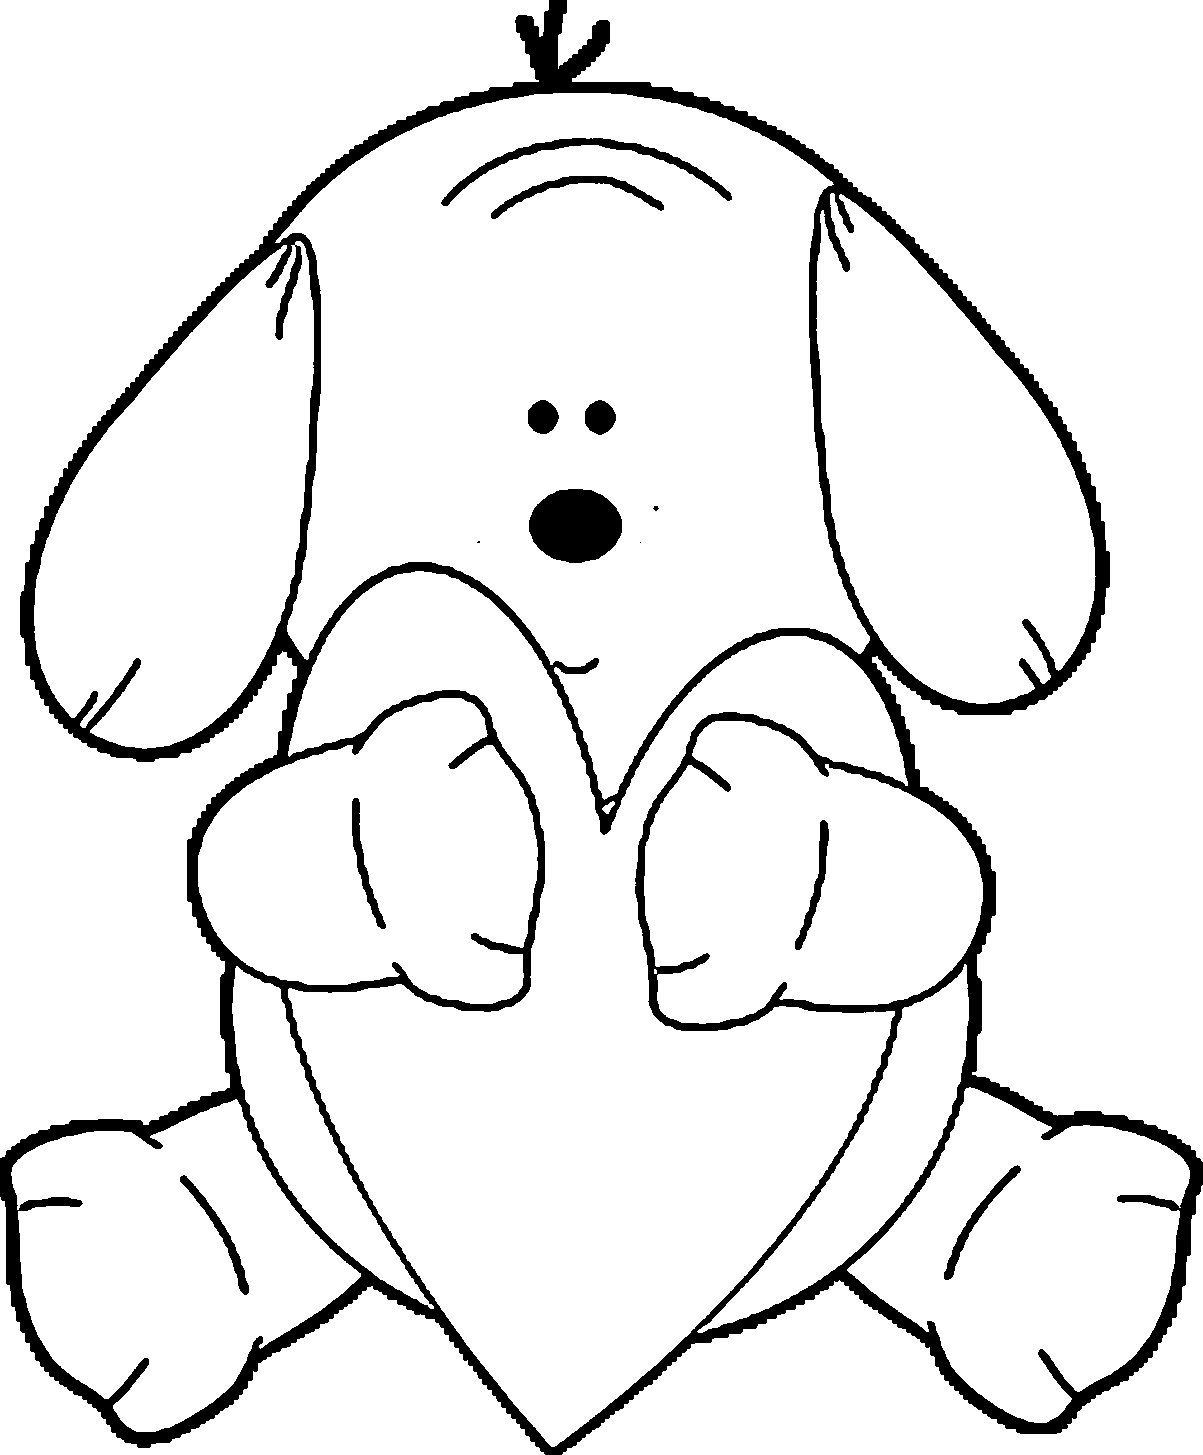 Hearts And Dogs Coloring Pages - Coloring Home